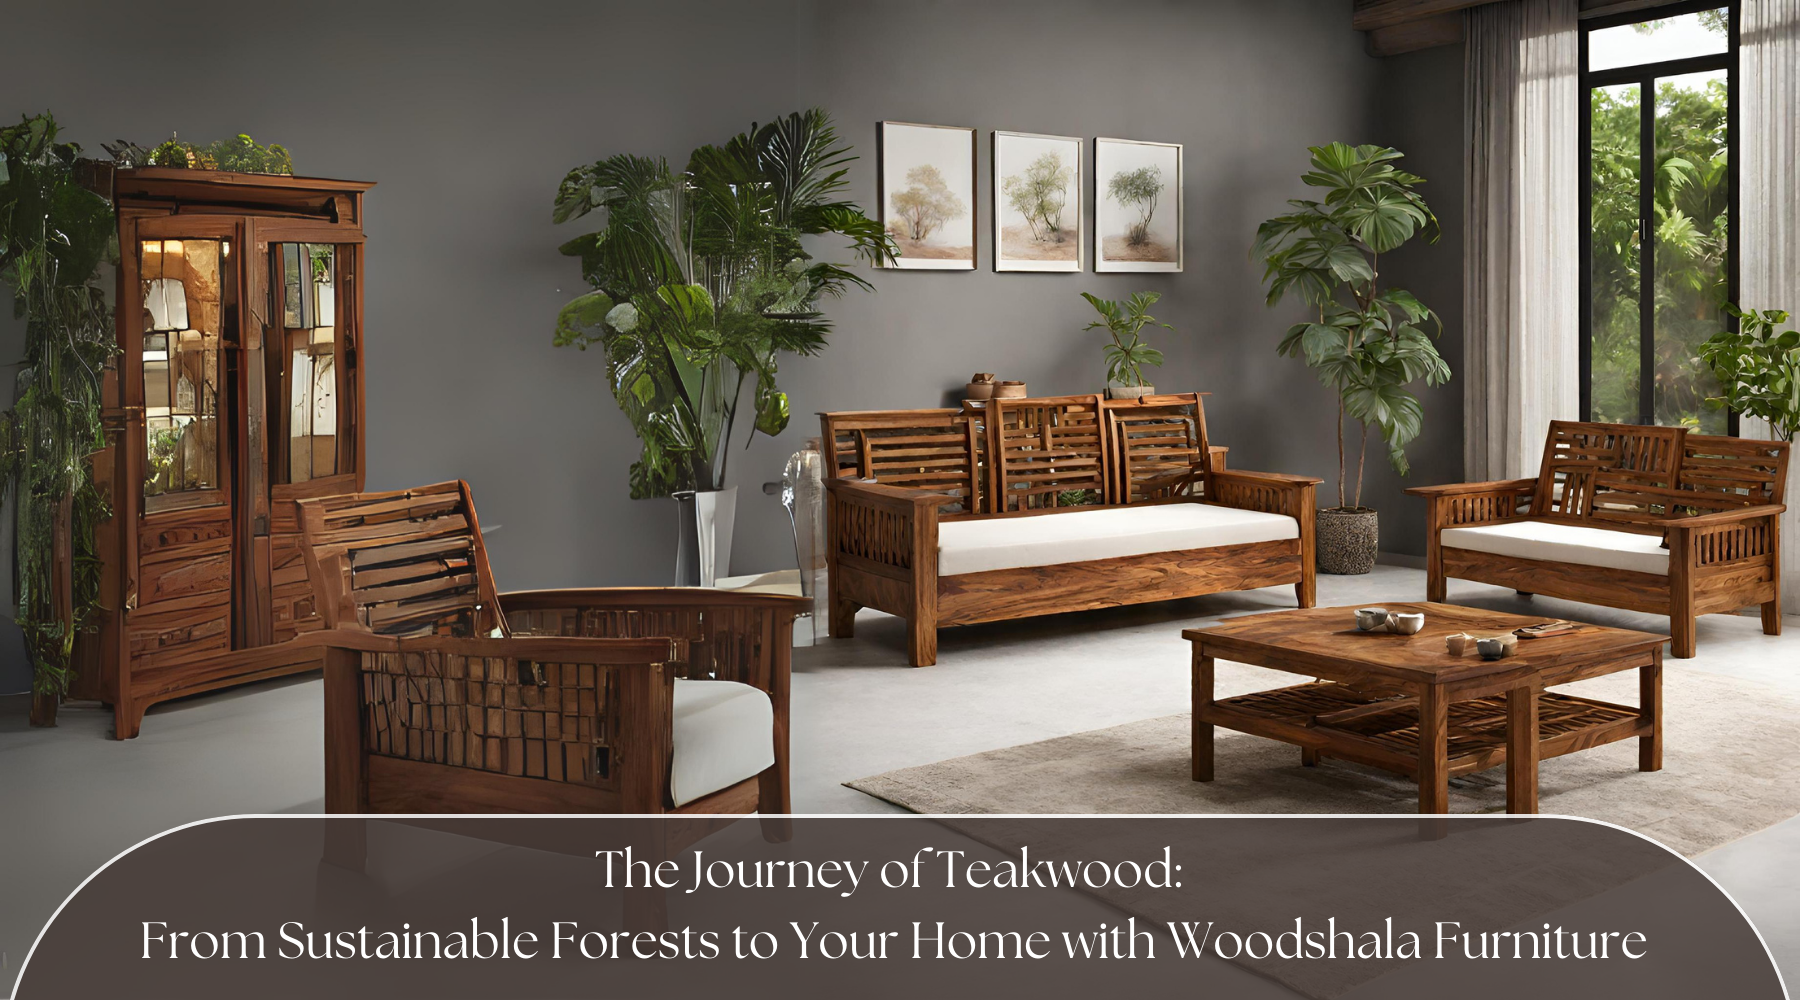 The Journey of Teakwood: From Sustainable Forests to Your Home with Woodshala Furniture